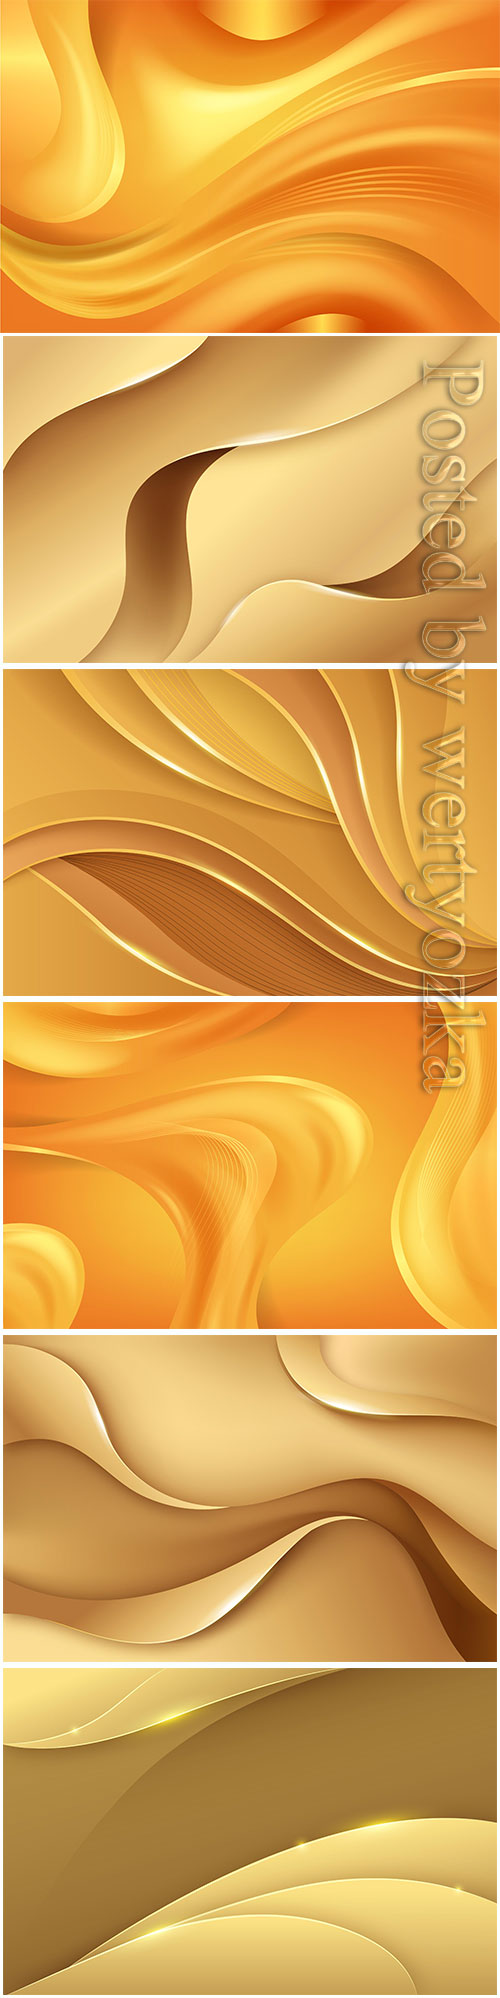 Gold vector backgrounds with with waves